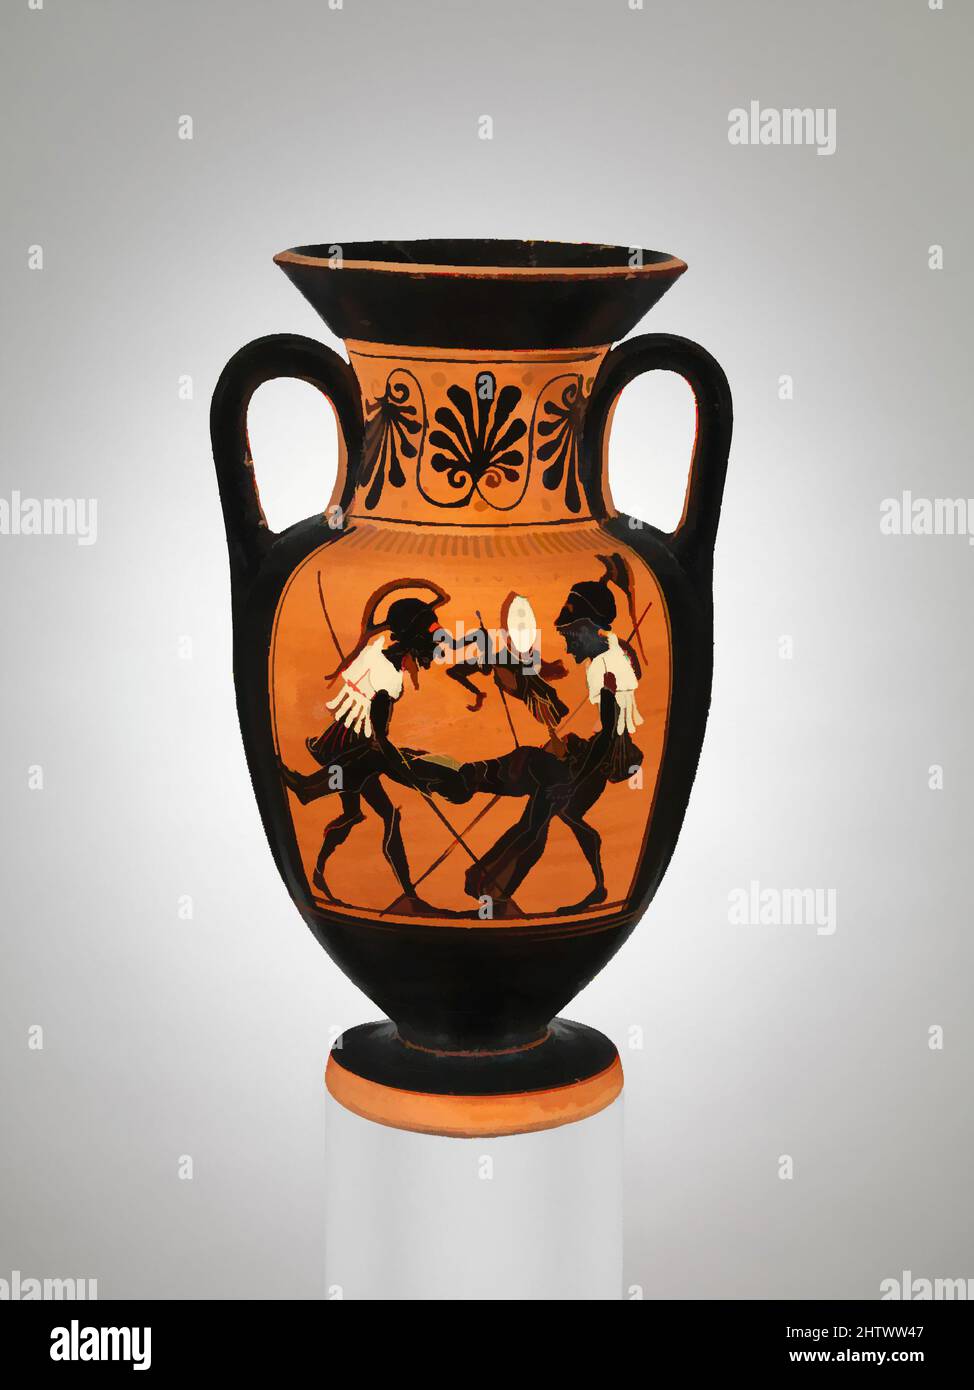 Art inspired by Terracotta neck-amphora (jar), Archaic, ca. 500 B.C., Greek, Attic, Terracotta; black-figure, H. 7 3/16 in. (18.3 cm), Vases, Obverse, Thanatos (Death) and Hypnos (Sleep) with the body of Sarpedon, Reverse, Eos (Dawn) with the body of her son, Memnon. The scenes on this, Classic works modernized by Artotop with a splash of modernity. Shapes, color and value, eye-catching visual impact on art. Emotions through freedom of artworks in a contemporary way. A timeless message pursuing a wildly creative new direction. Artists turning to the digital medium and creating the Artotop NFT Stock Photo